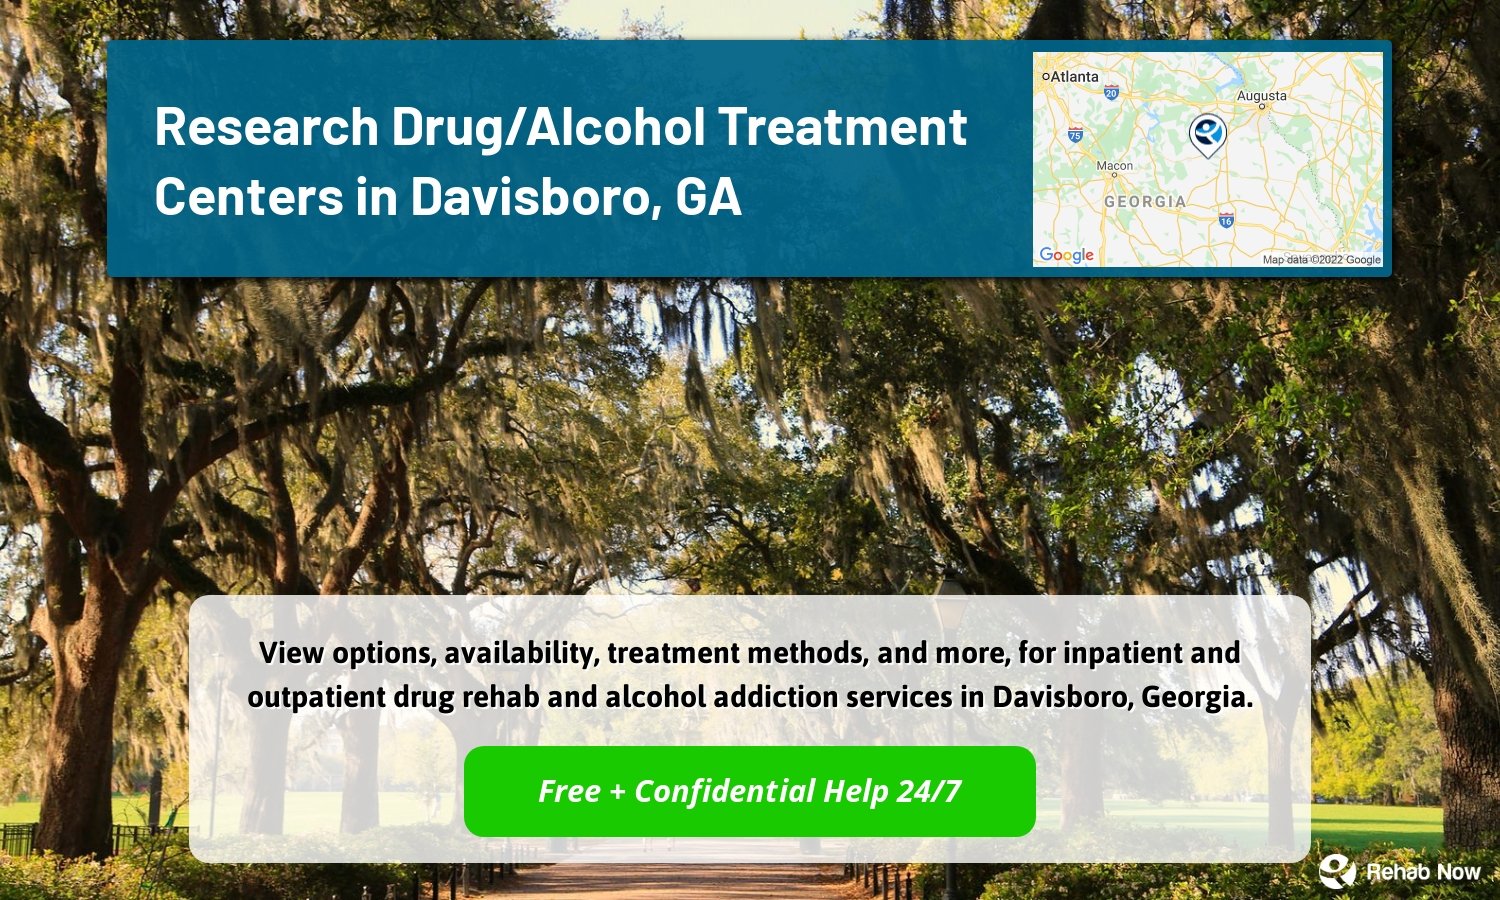 View options, availability, treatment methods, and more, for inpatient and outpatient drug rehab and alcohol addiction services in Davisboro, Georgia.